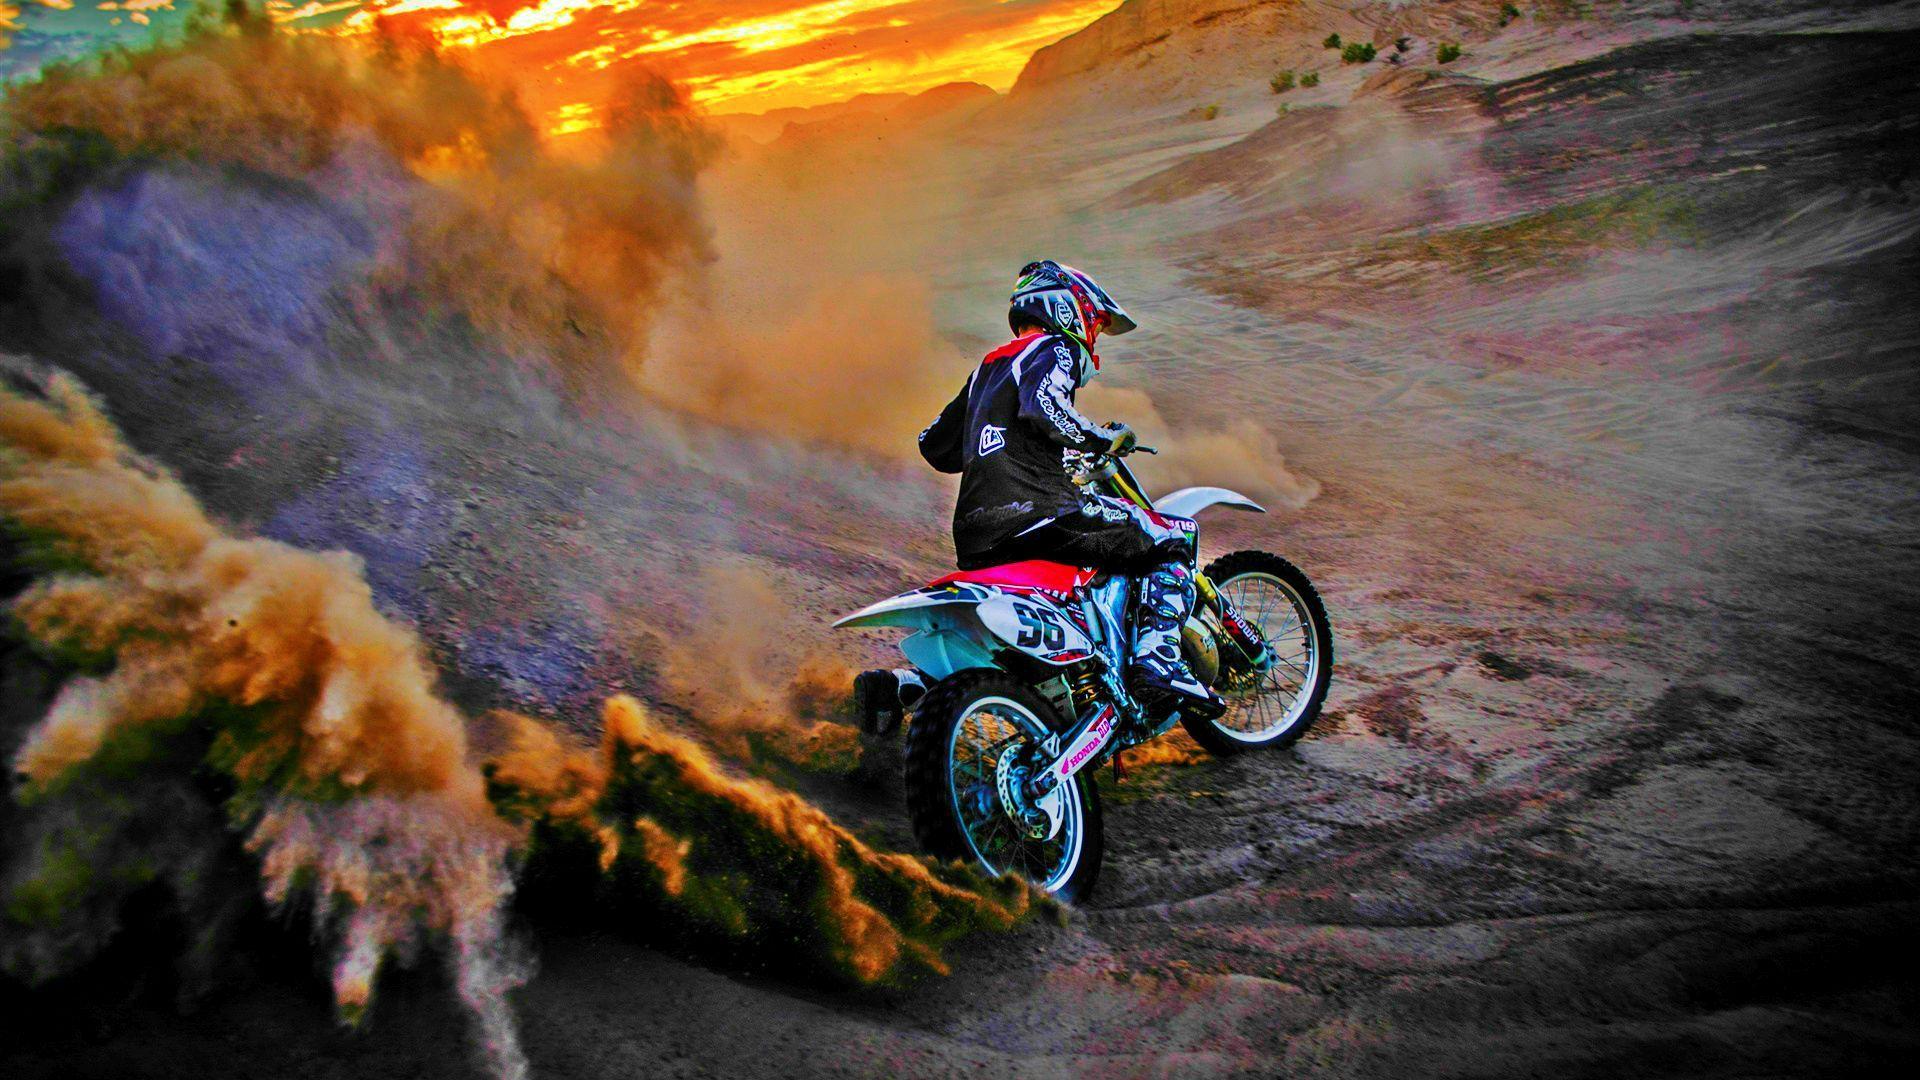 Freestyle Motocross Extreme See The Complete BuzzTrakr Video Page